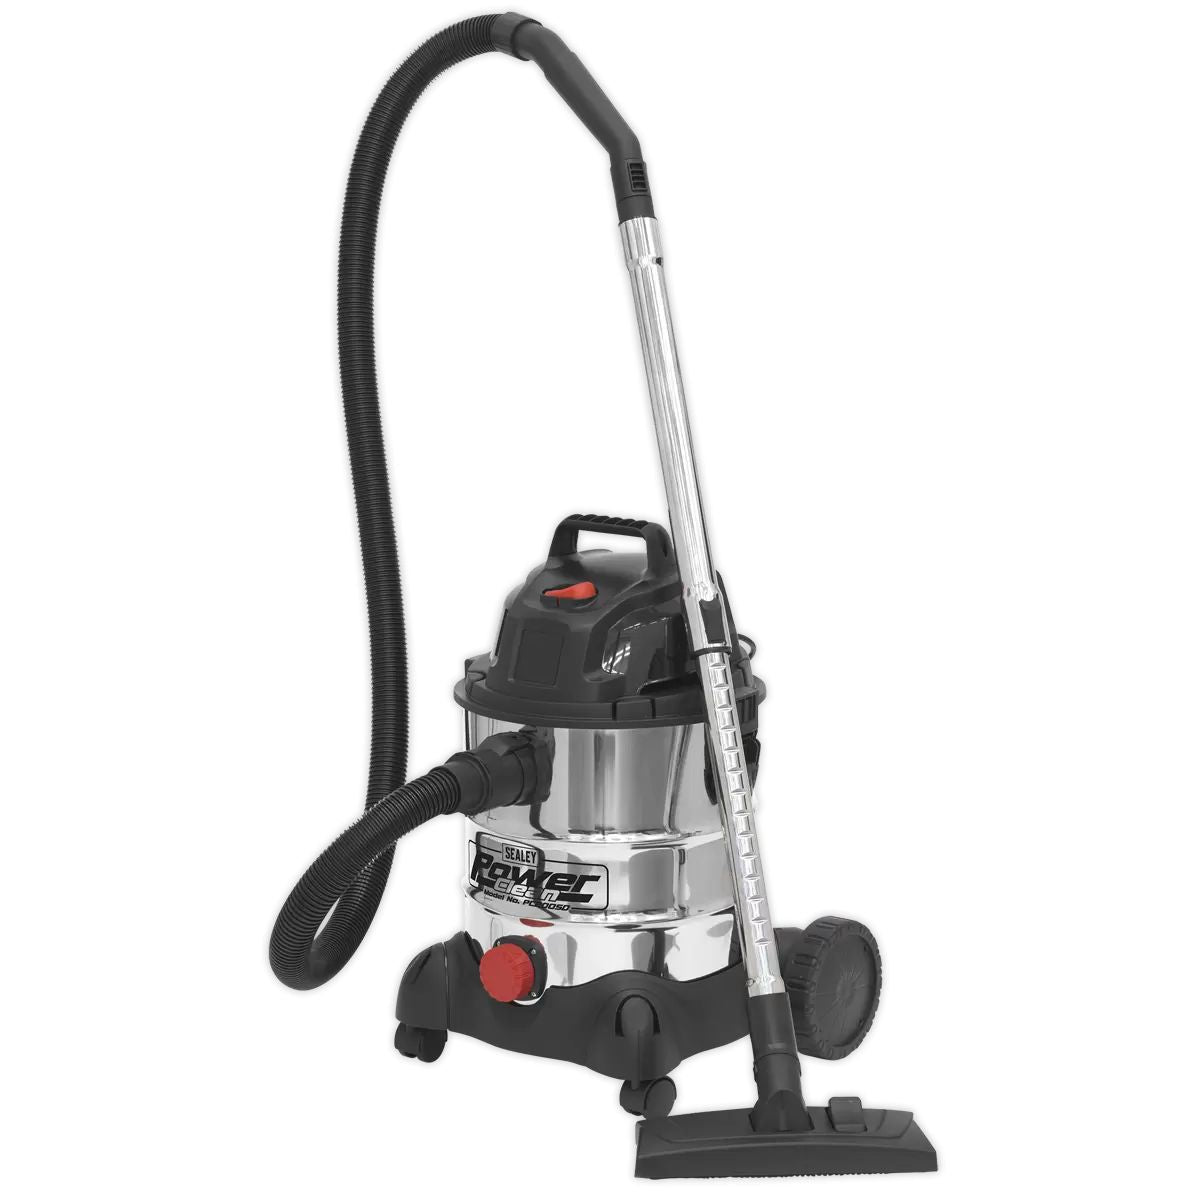 Sealey PC200SD Wet and Dry 20L Vacuum Cleaner 230V/1250W